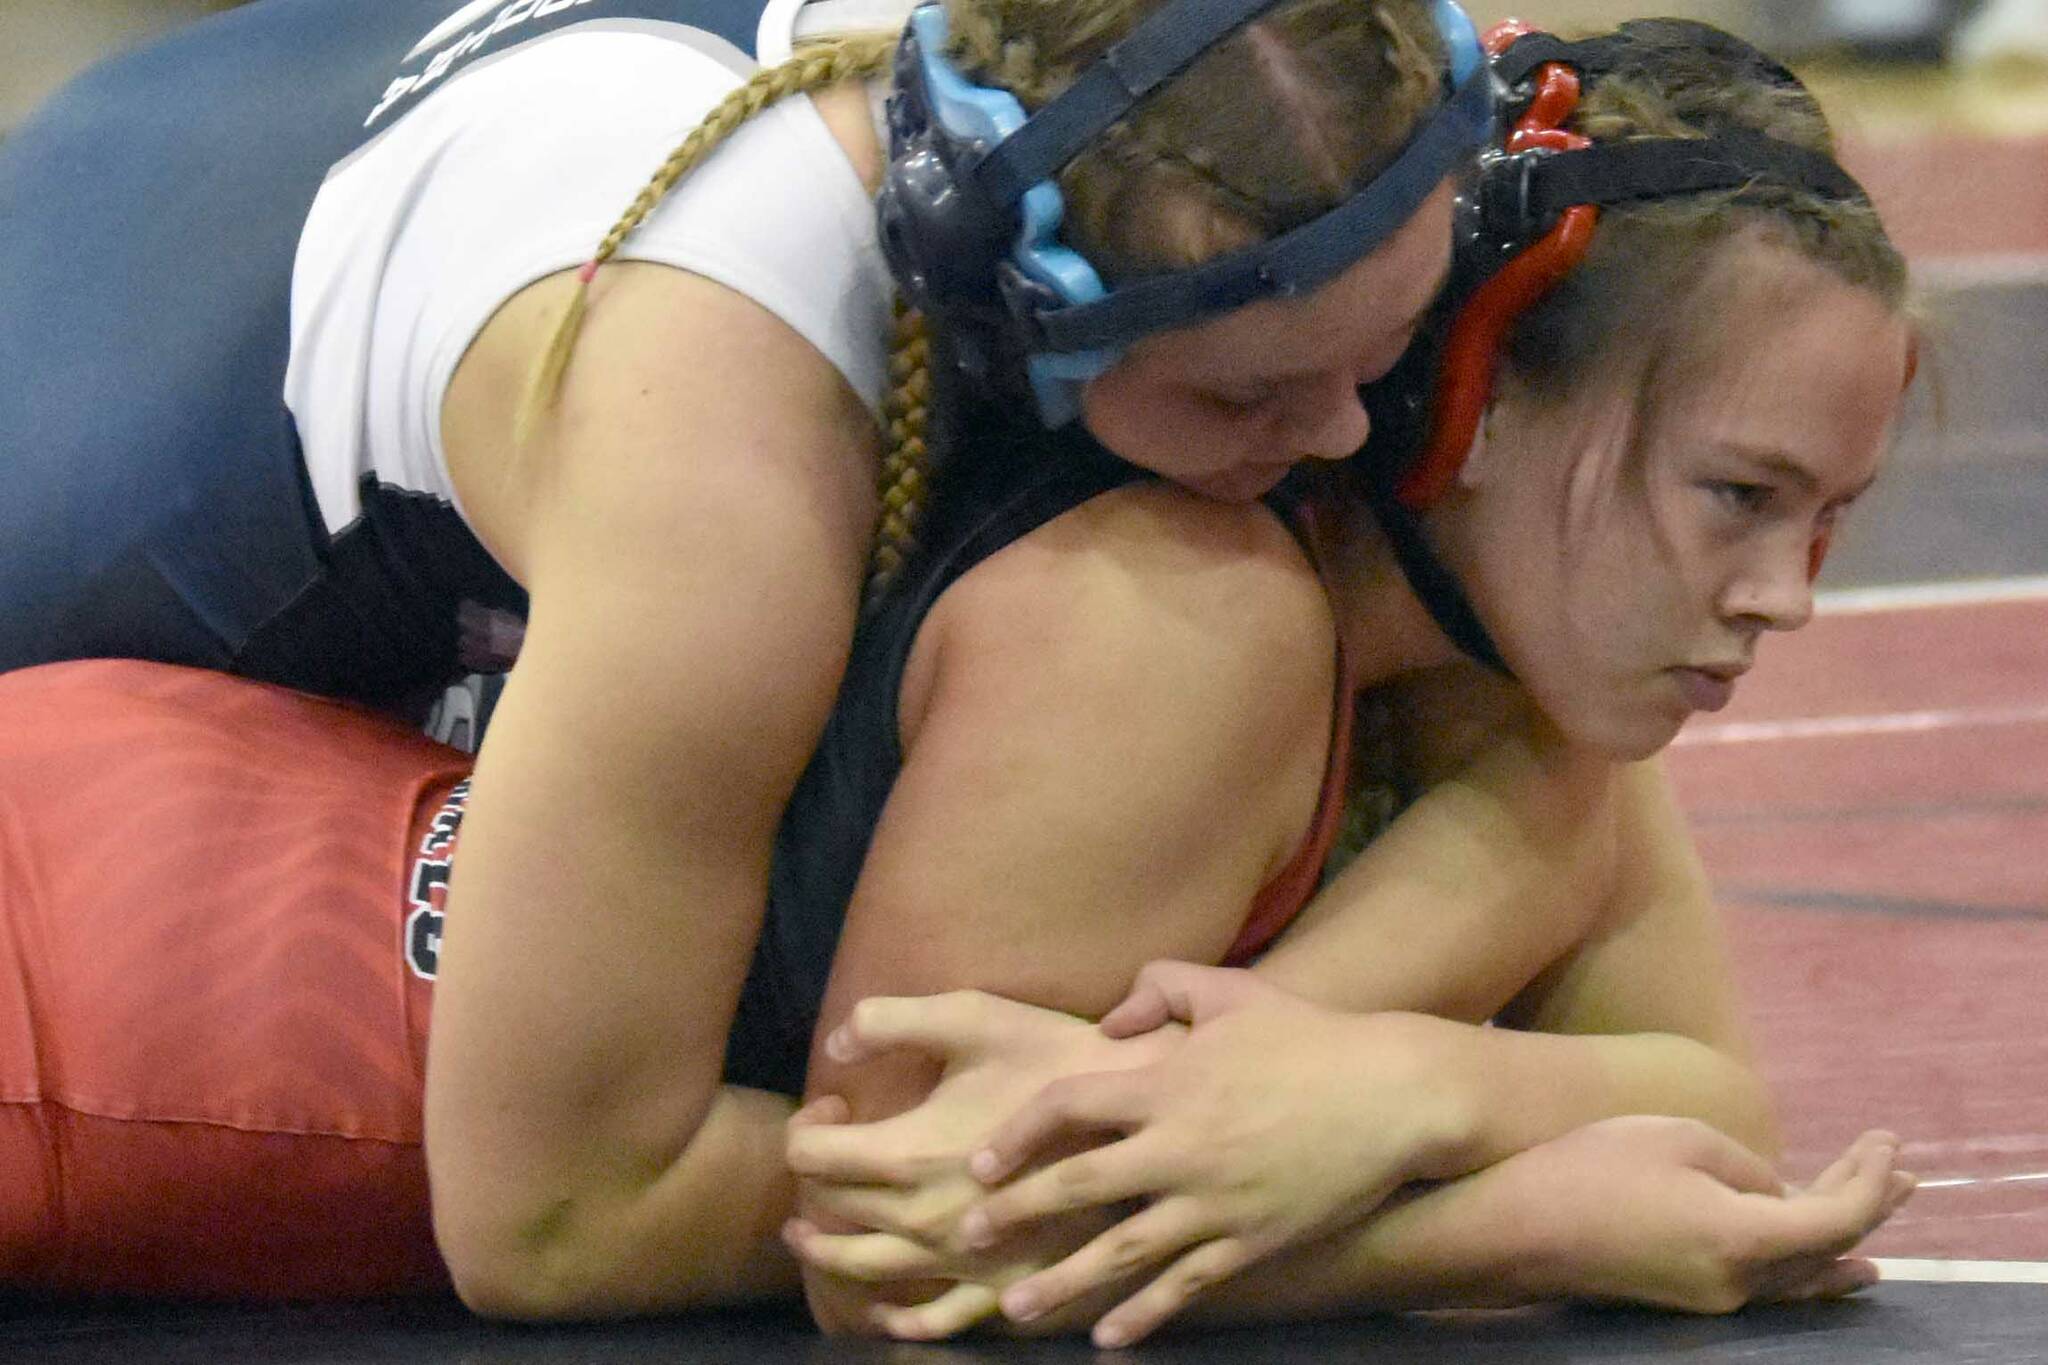 Soldotna's Daisy Hannevold wrestles with Kenai Central's Jalyn Yeoman at girls 138 pounds at the Luke Spruill Memorial Tournament on Saturday, Oct. 22, 2022, at Kenai Central High School in Kenai, Alaska. Hannevold was able to pin Yeoman. (Photo by Jeff Helminiak/Peninsula Clarion)